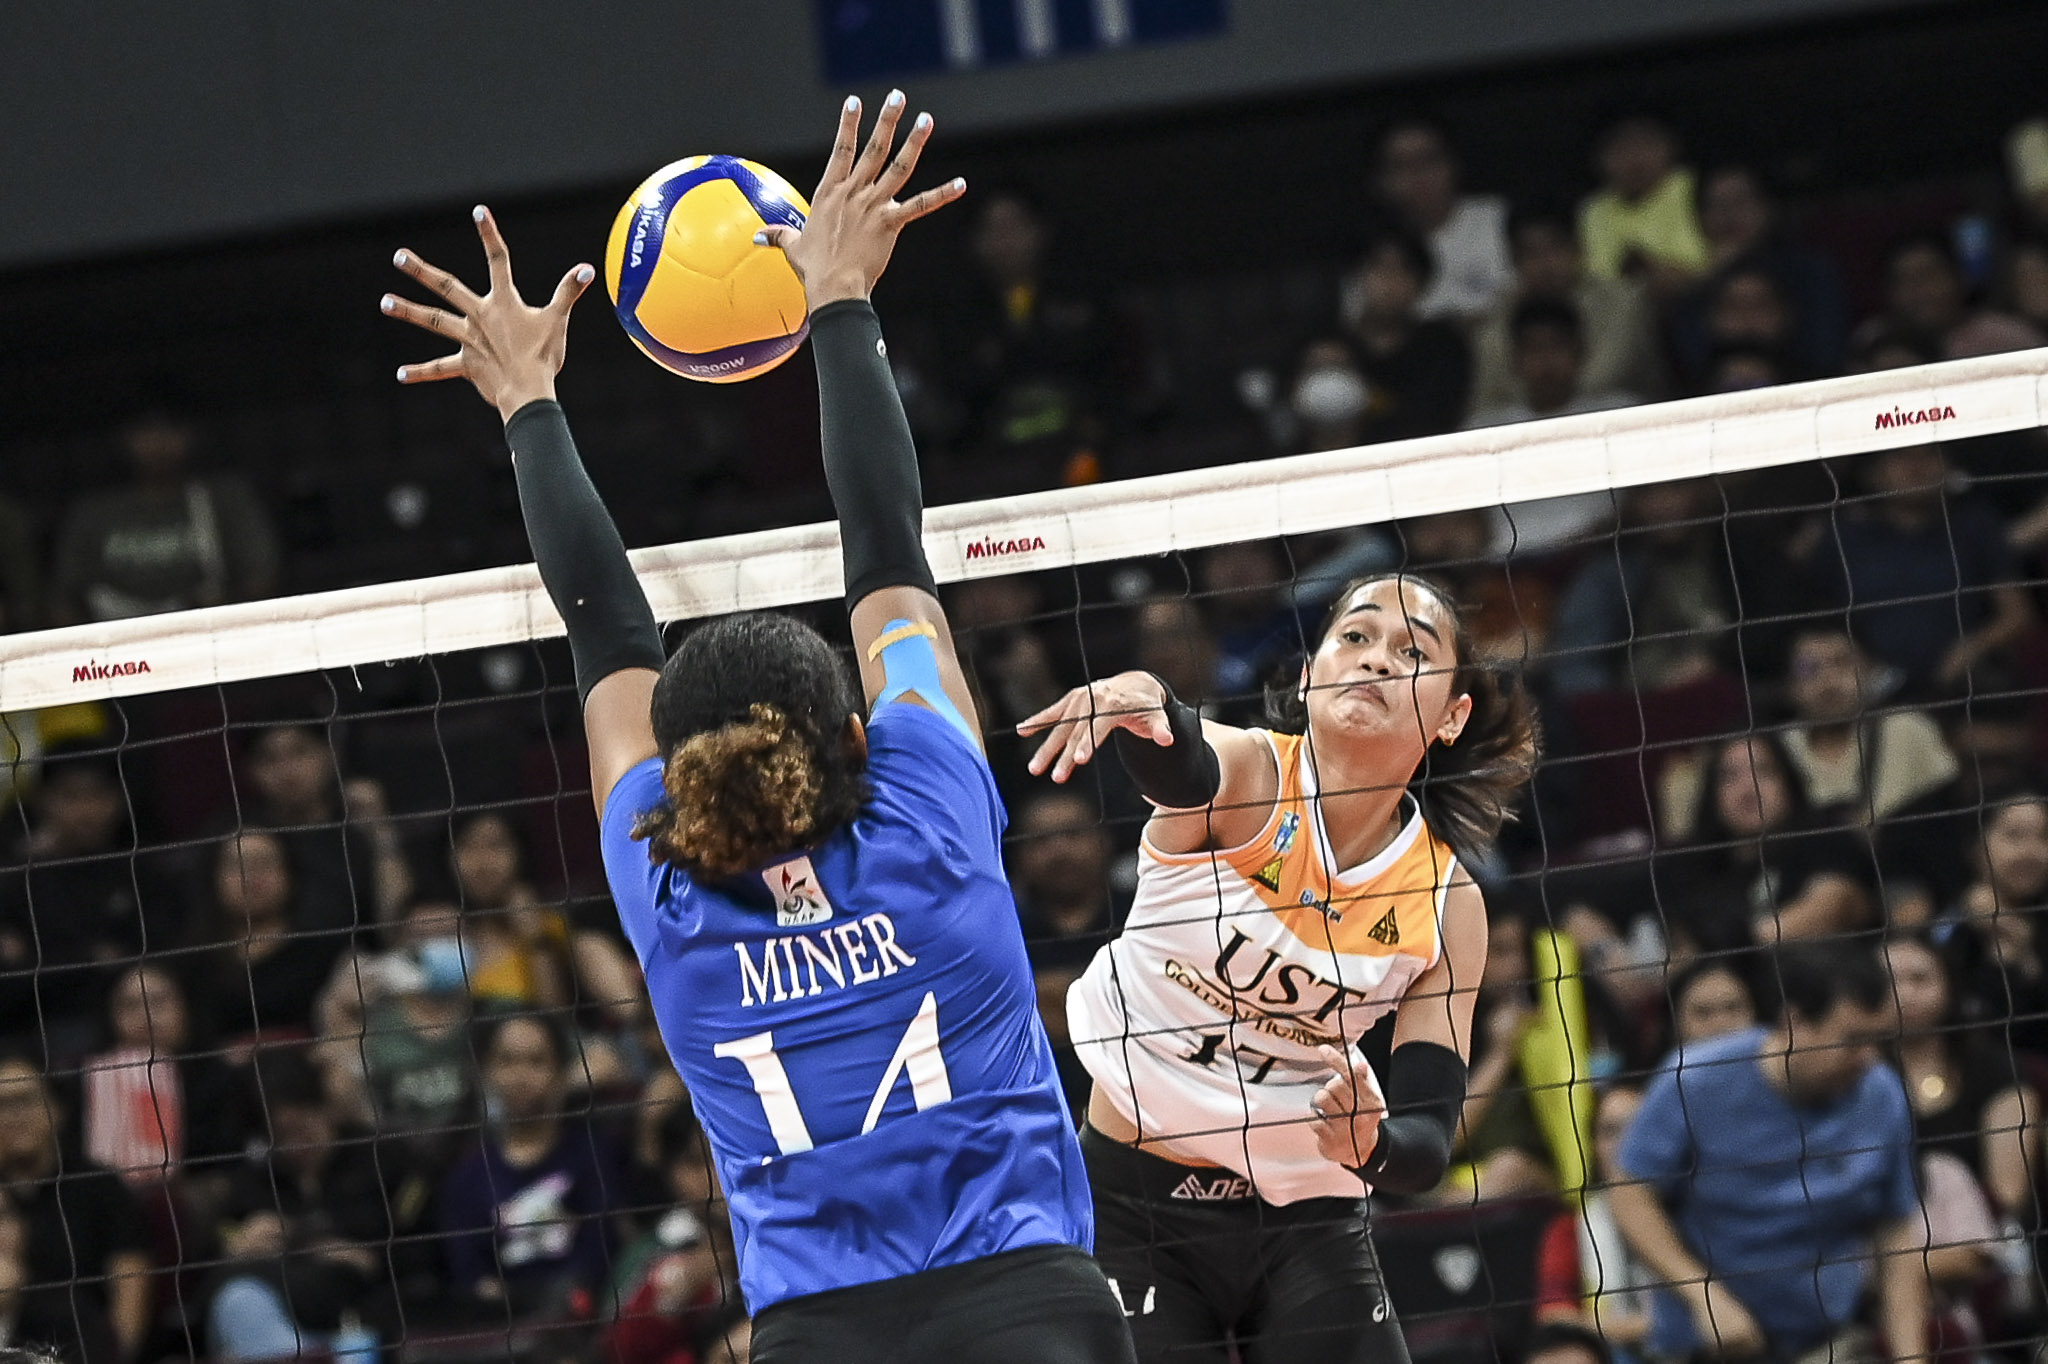 UST sweeps Ateneo, stays atop at 5-0